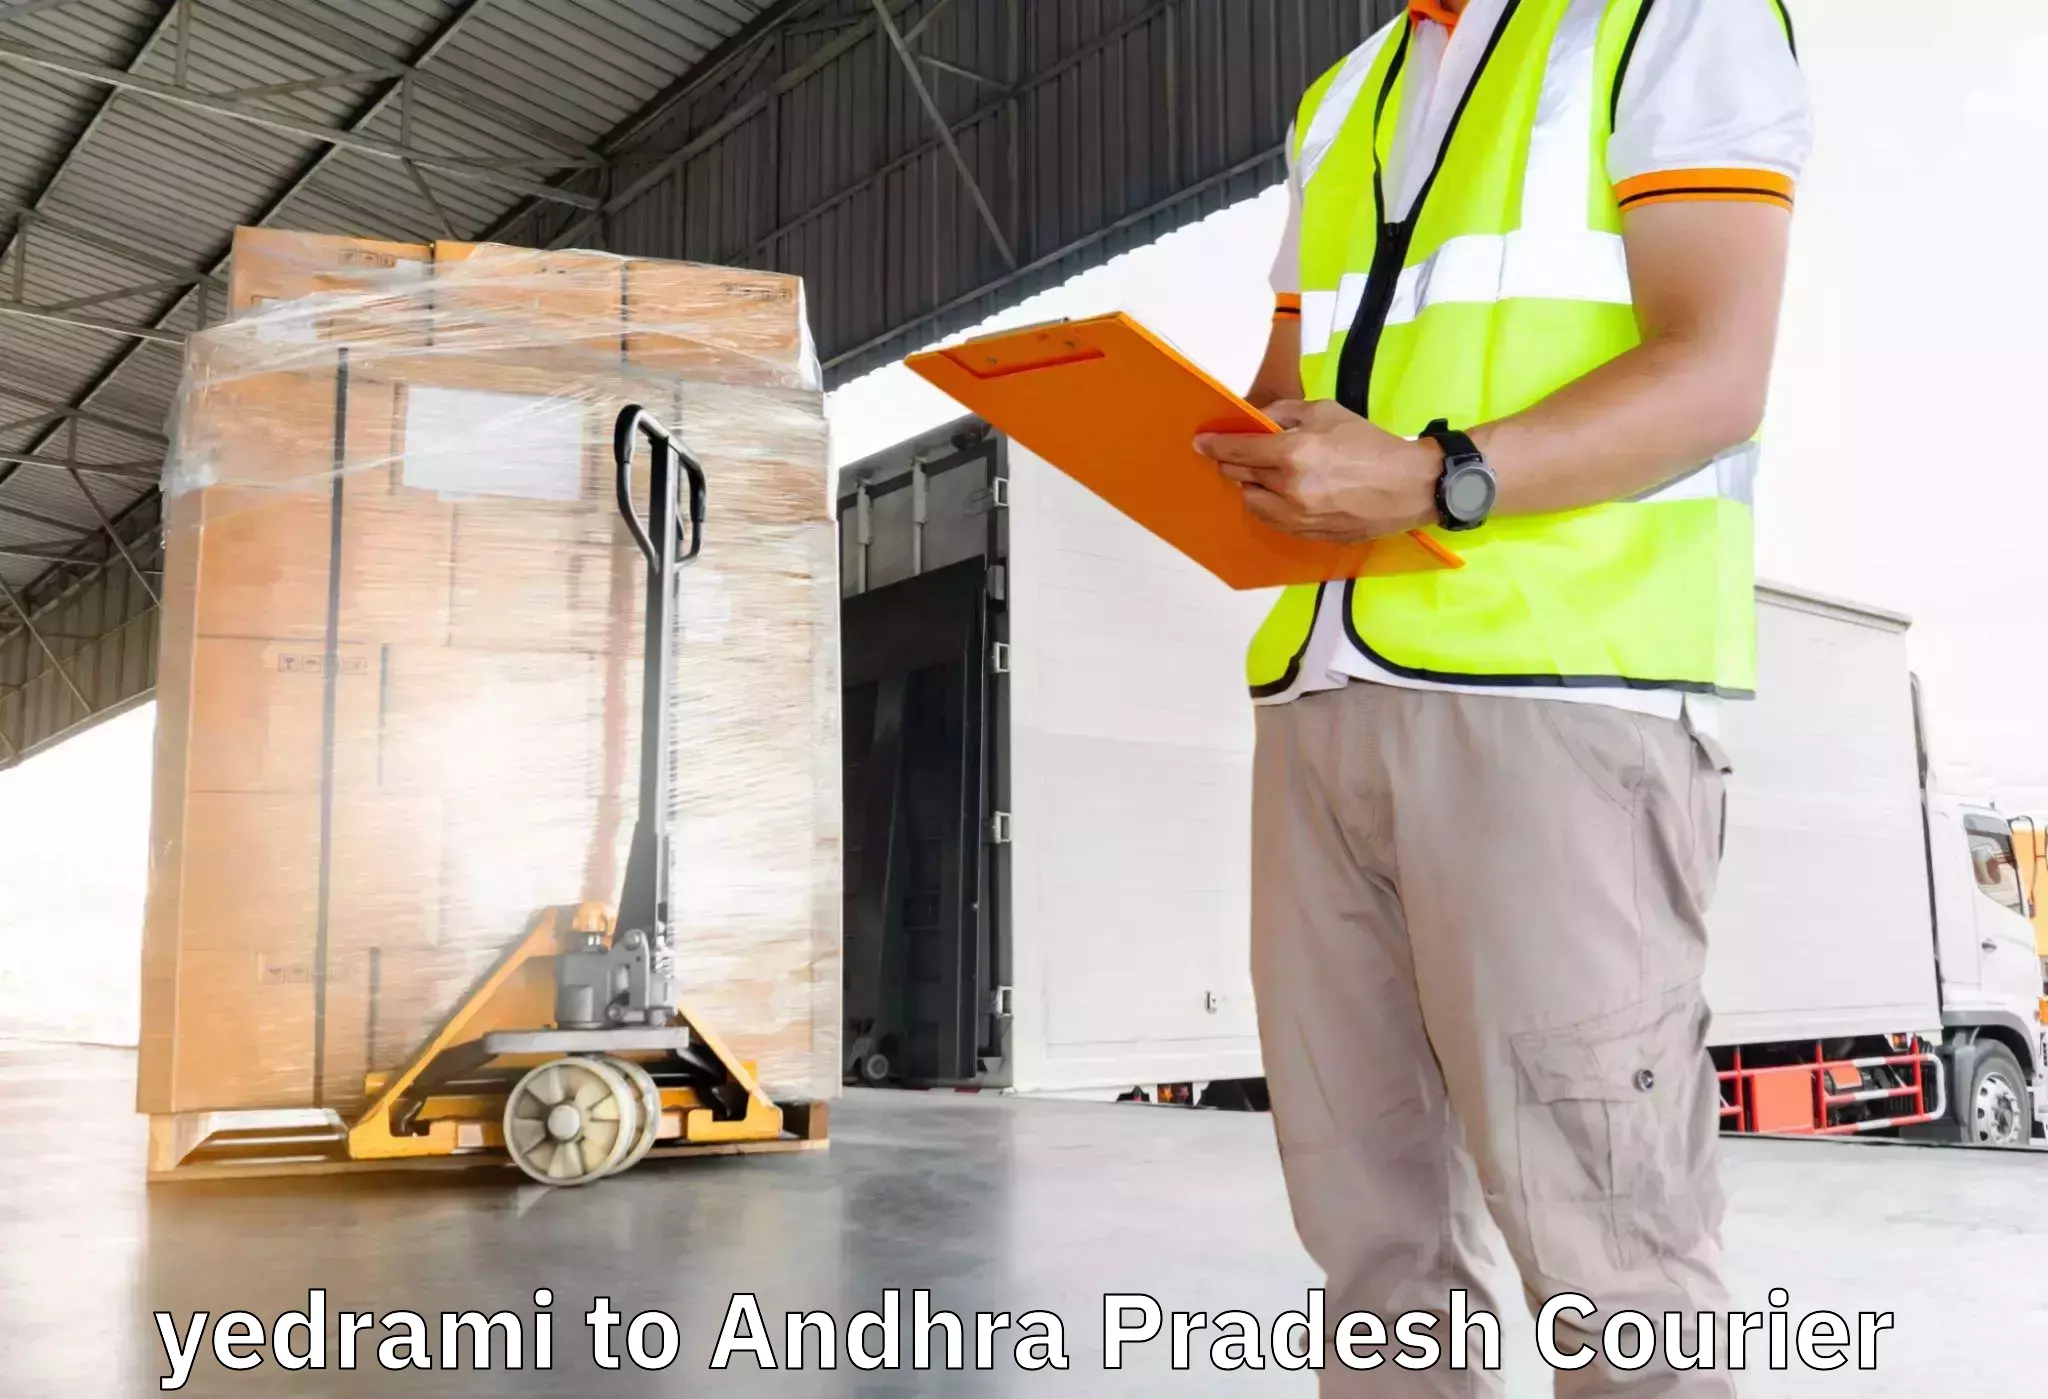 Affordable home movers yedrami to Jaggayyapet